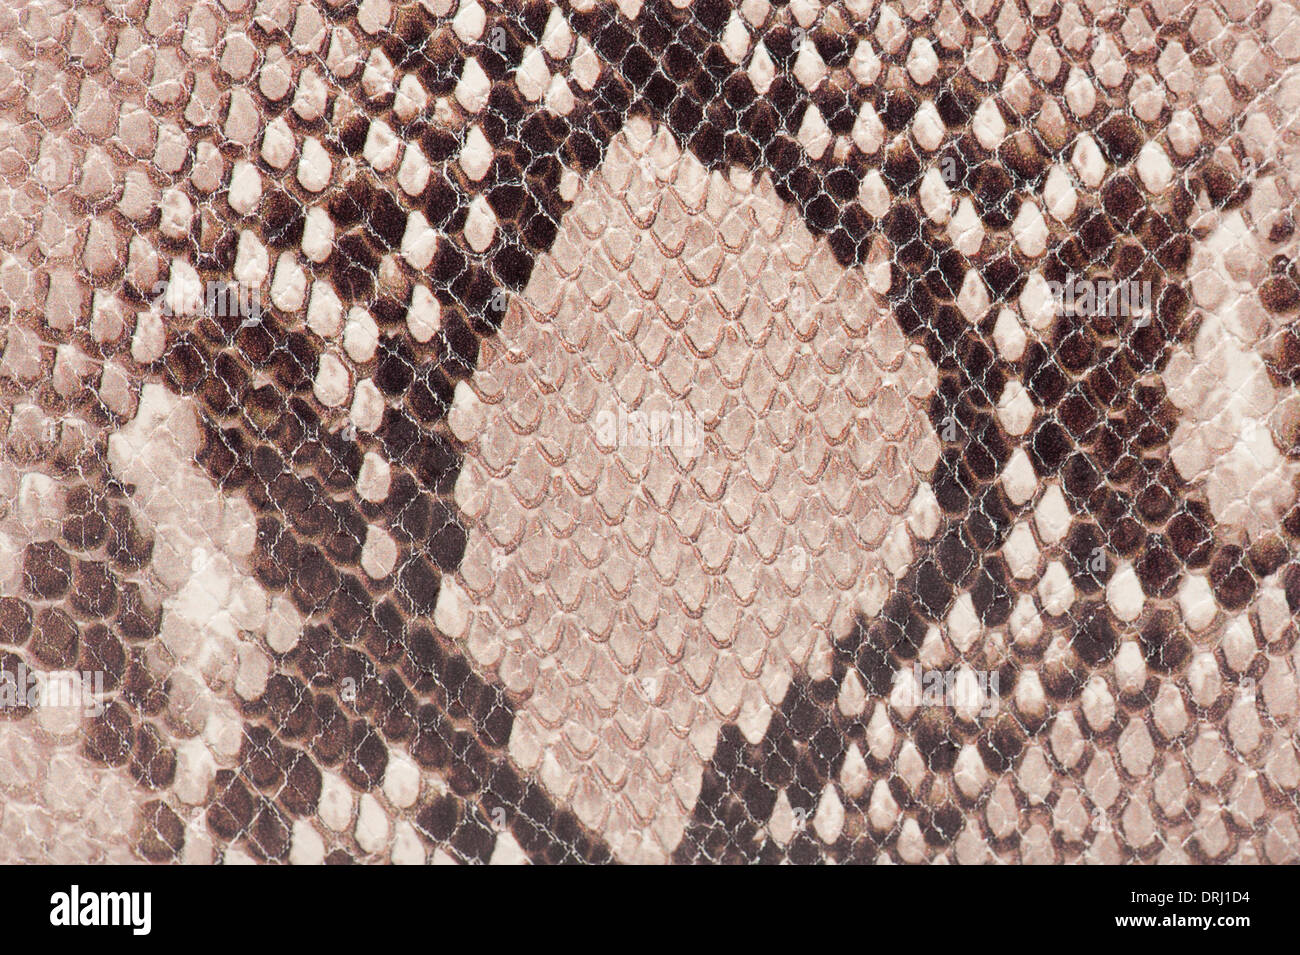 macro detail of snake brown leather Stock Photo